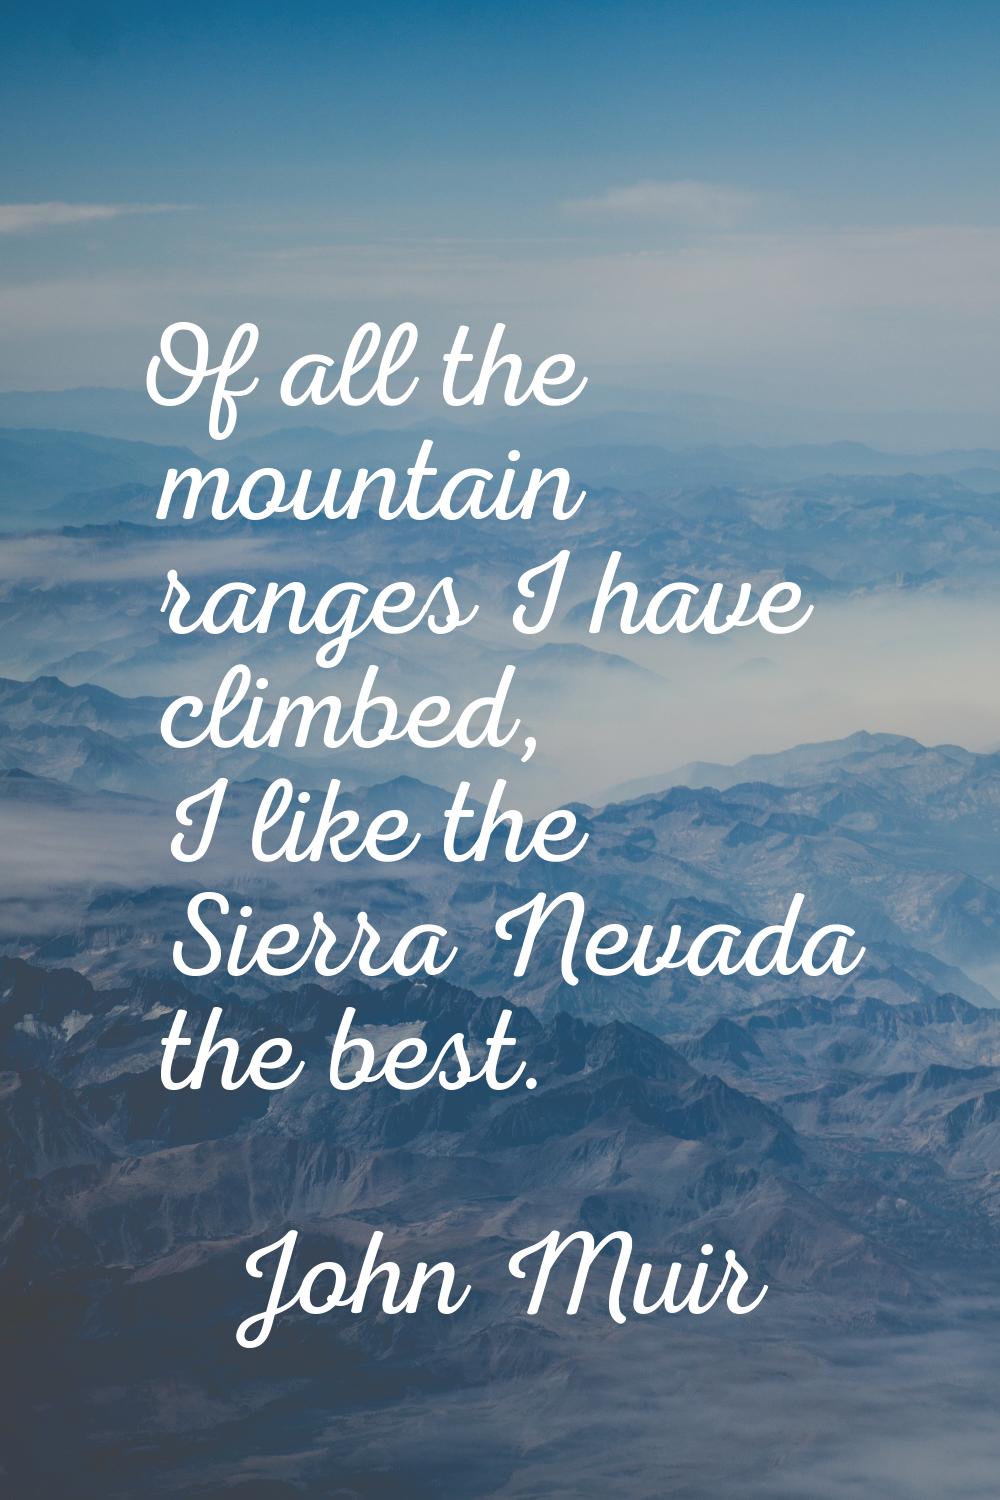 Of all the mountain ranges I have climbed, I like the Sierra Nevada the best.